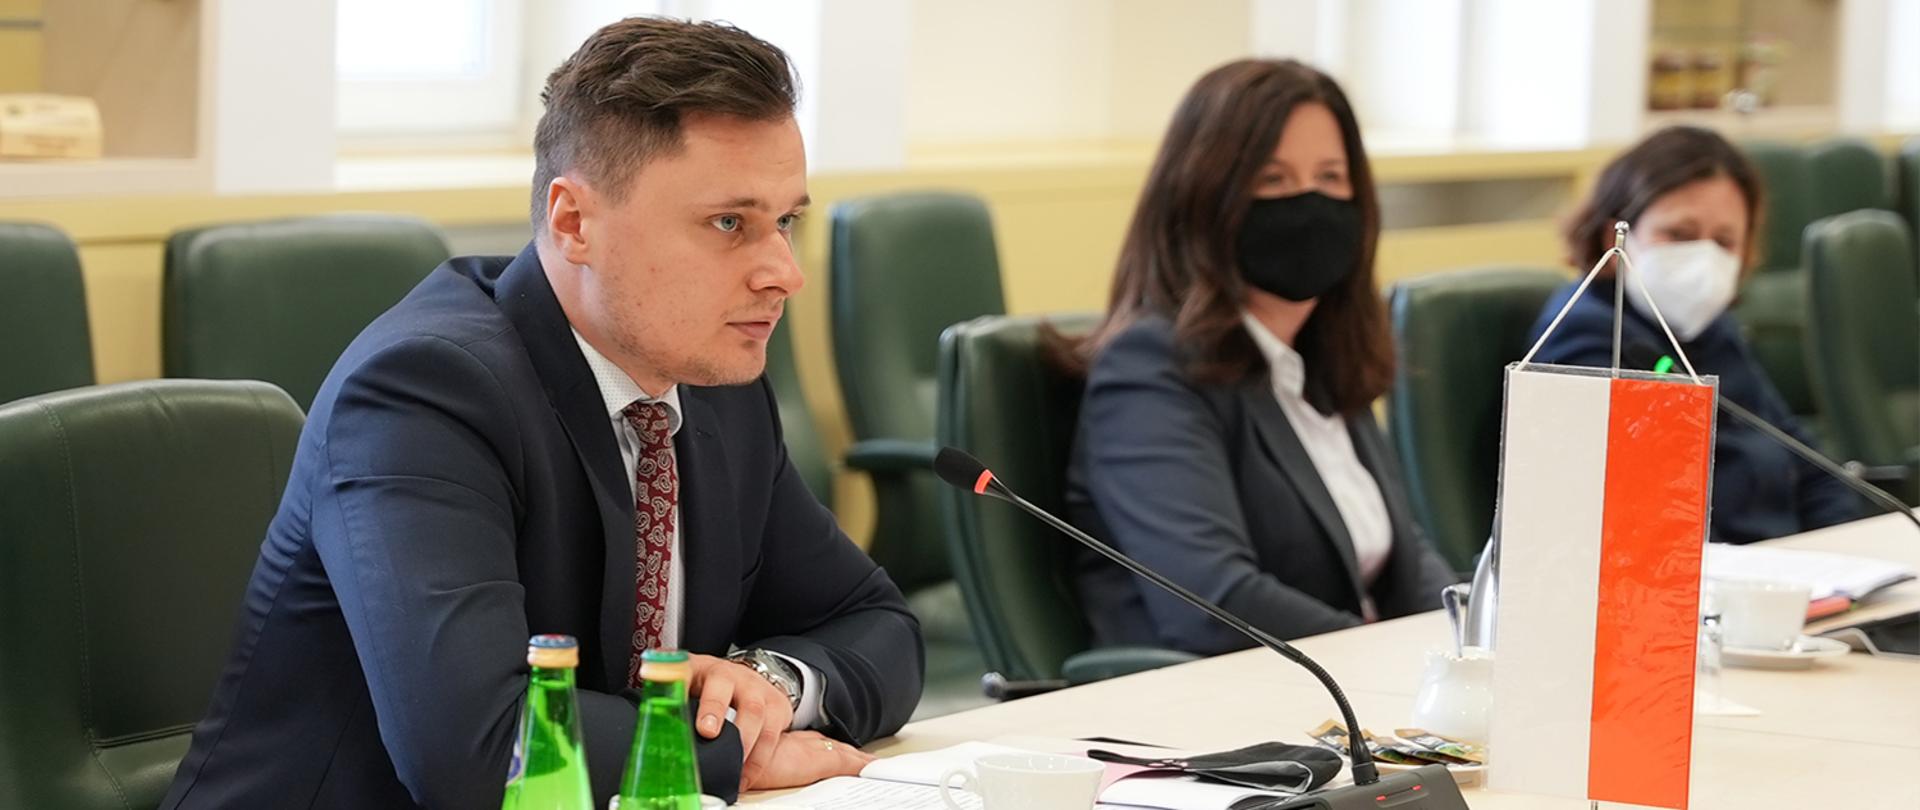 Mr. Krzysztof Ciecióra, Undersecretary of State, during the meeting (Photo by MARD)